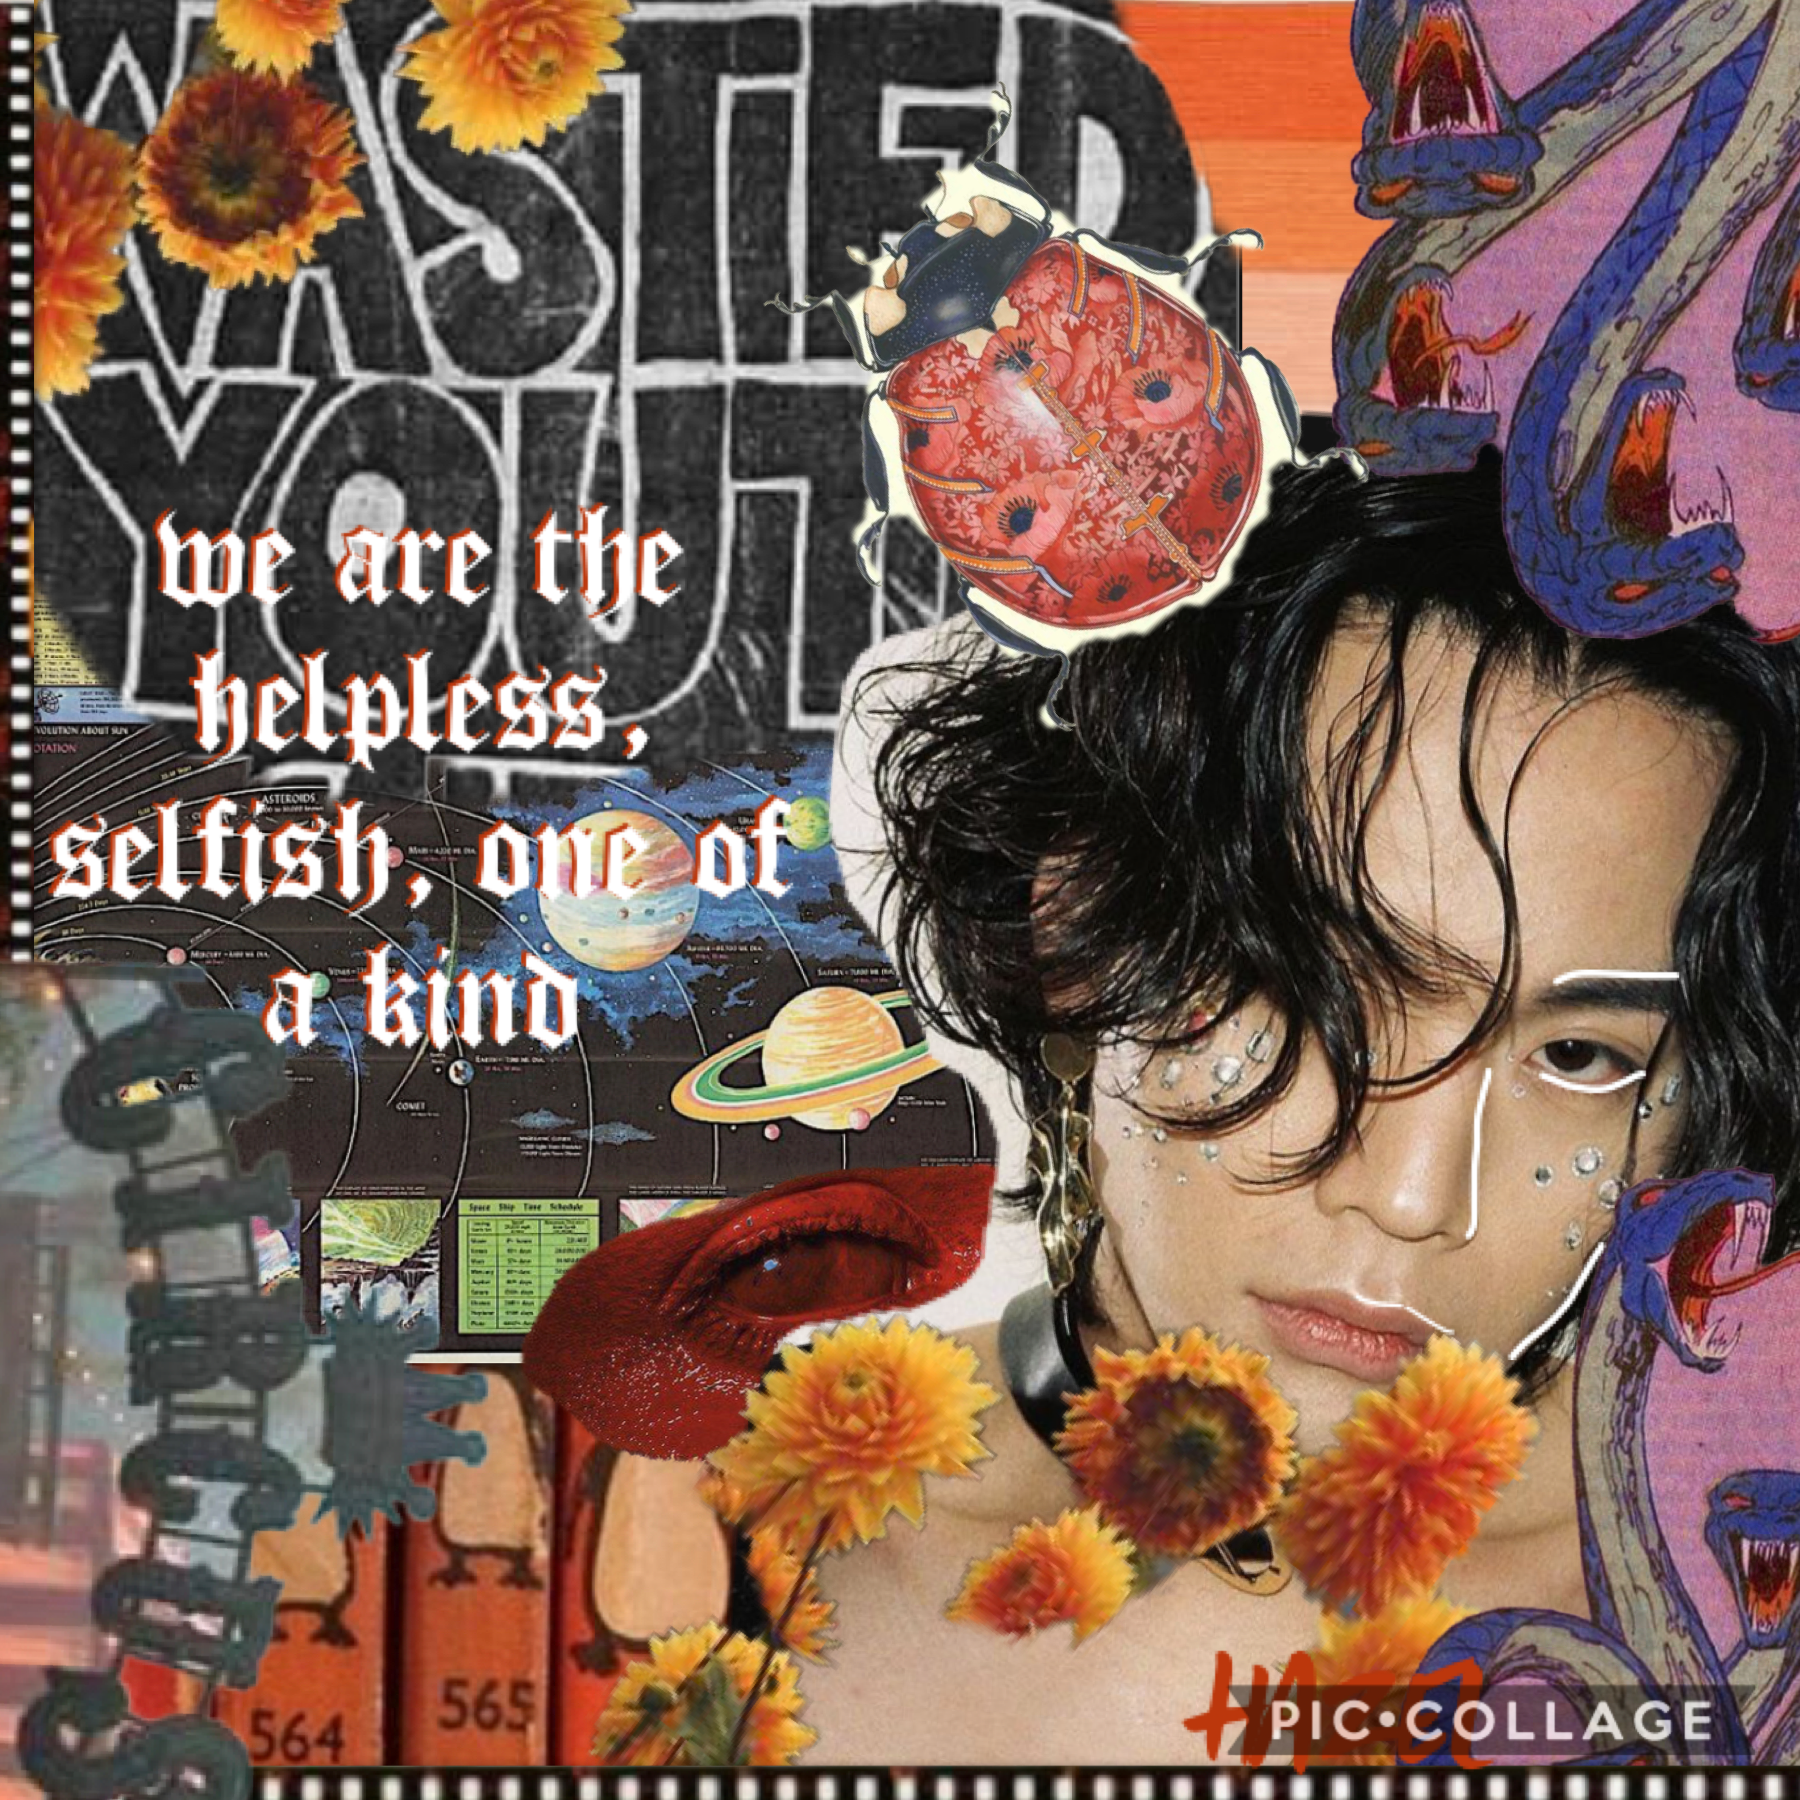 GENERATION WHY - CONAN GRAY 🗯 this collage is my inner angsty teen coming out. i hate school so much. the first day back from break I already have two essays to write and both of them are for ap classes and a bunch of packets from my other classes aghhhhh